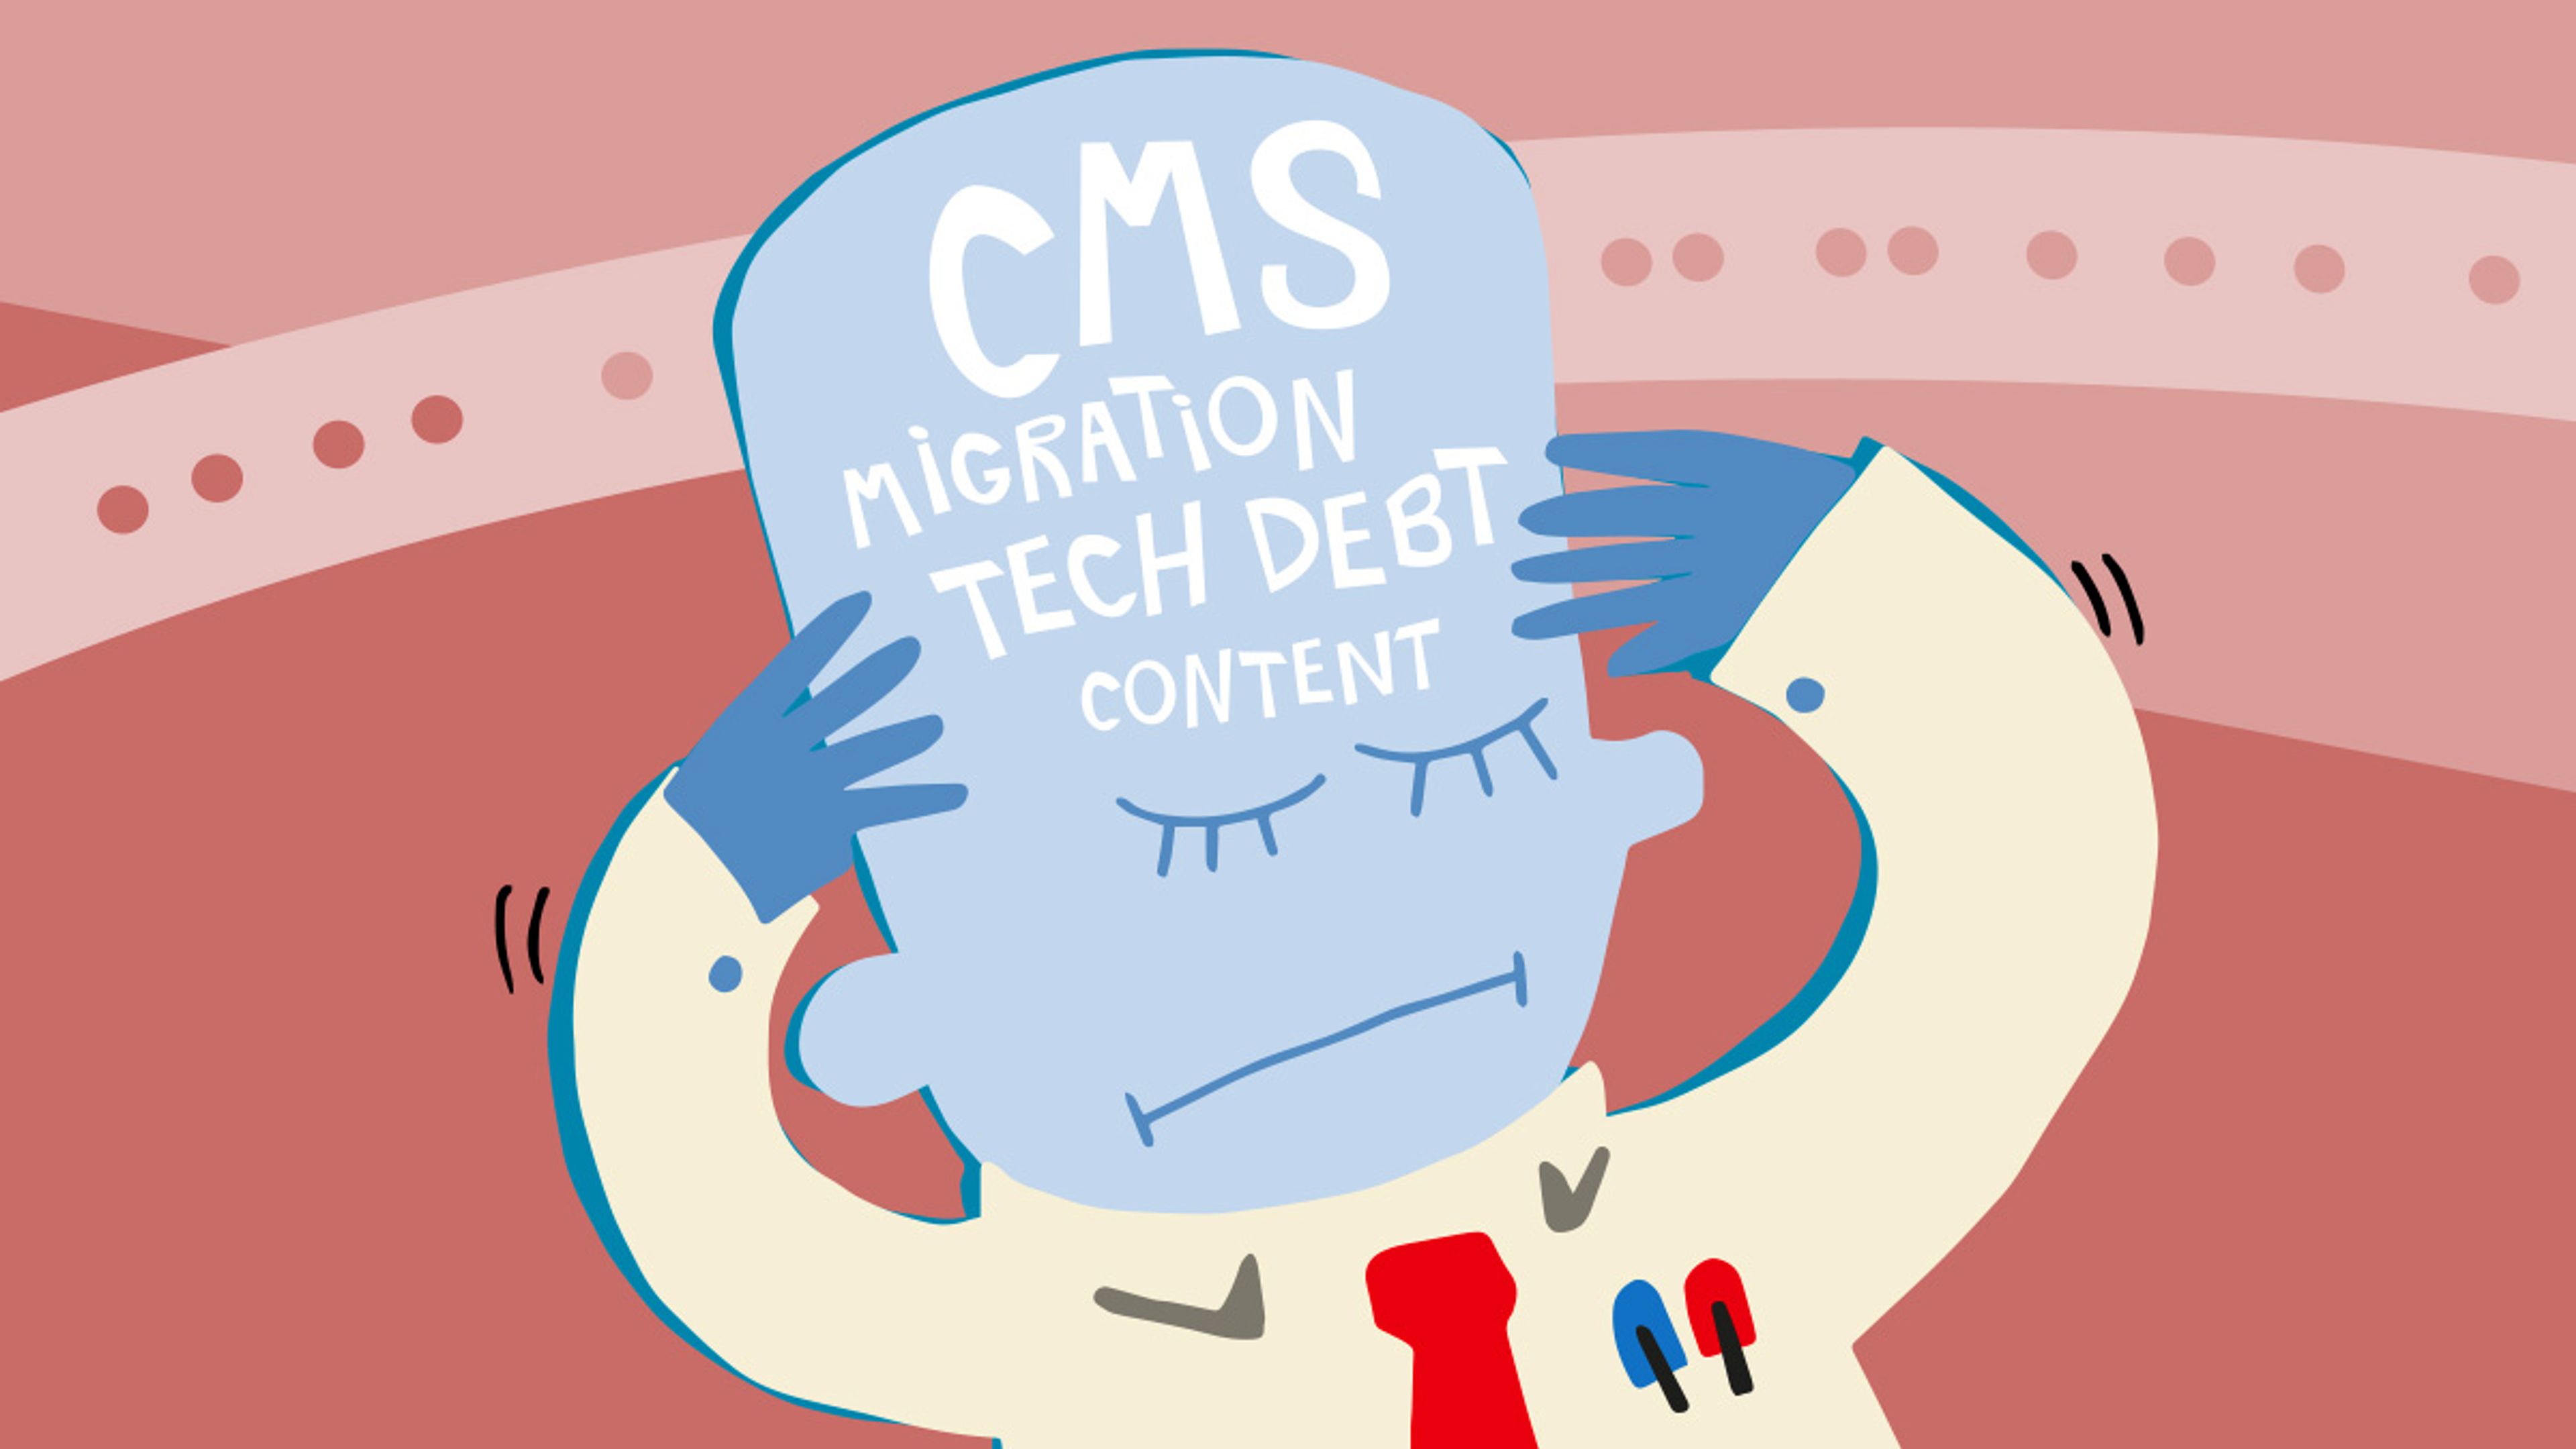 Illustration of a man with the words "CMS", "Migration", "Tech Debt" and "Content" floating in his head.